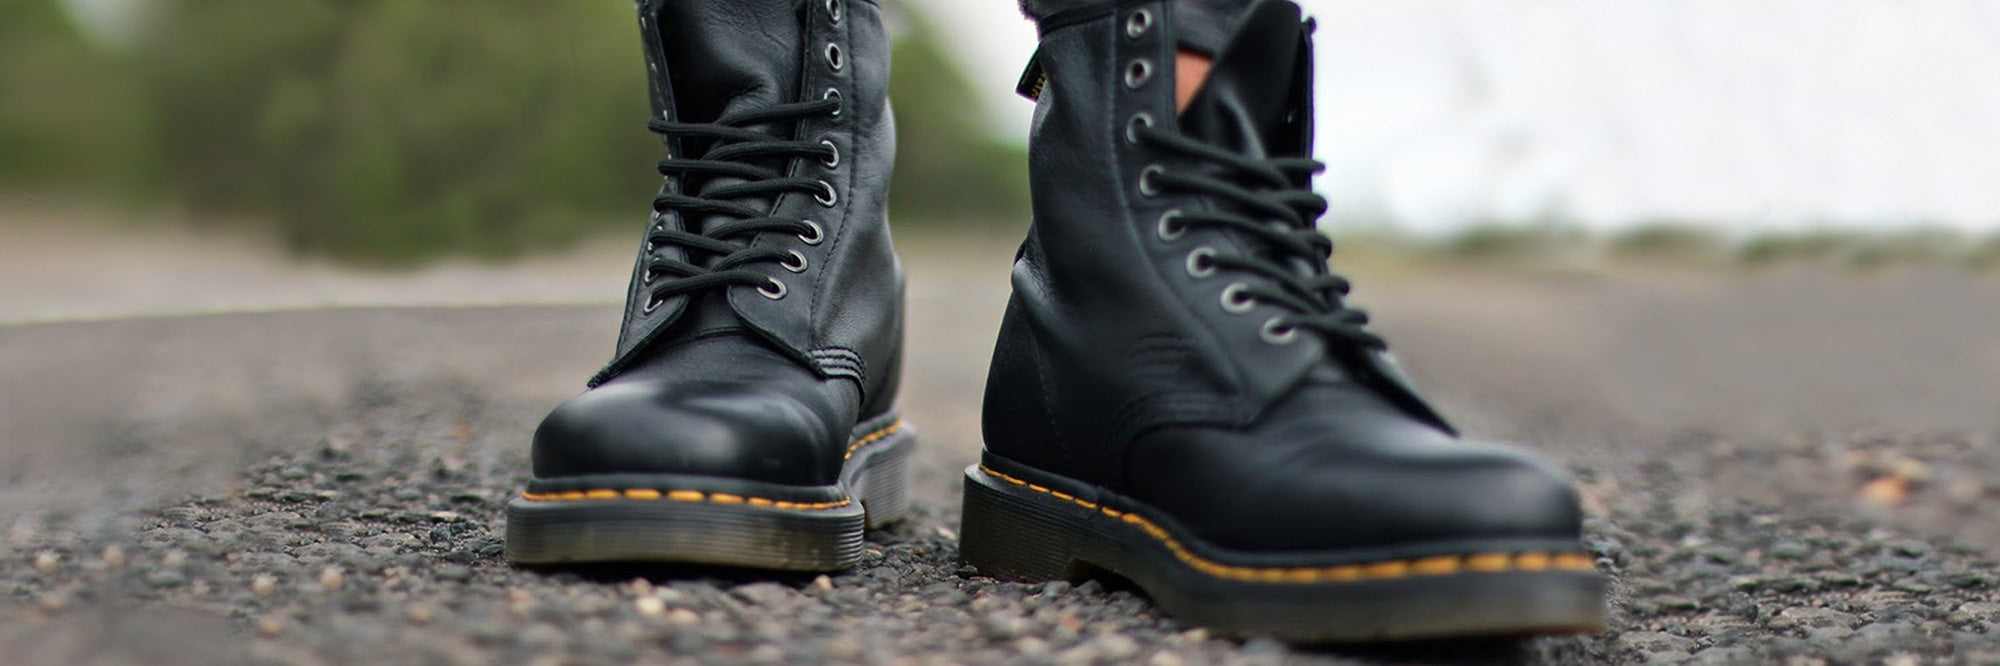 Dr Martens scrap guaranteed "For Life" range | Buy Me Once